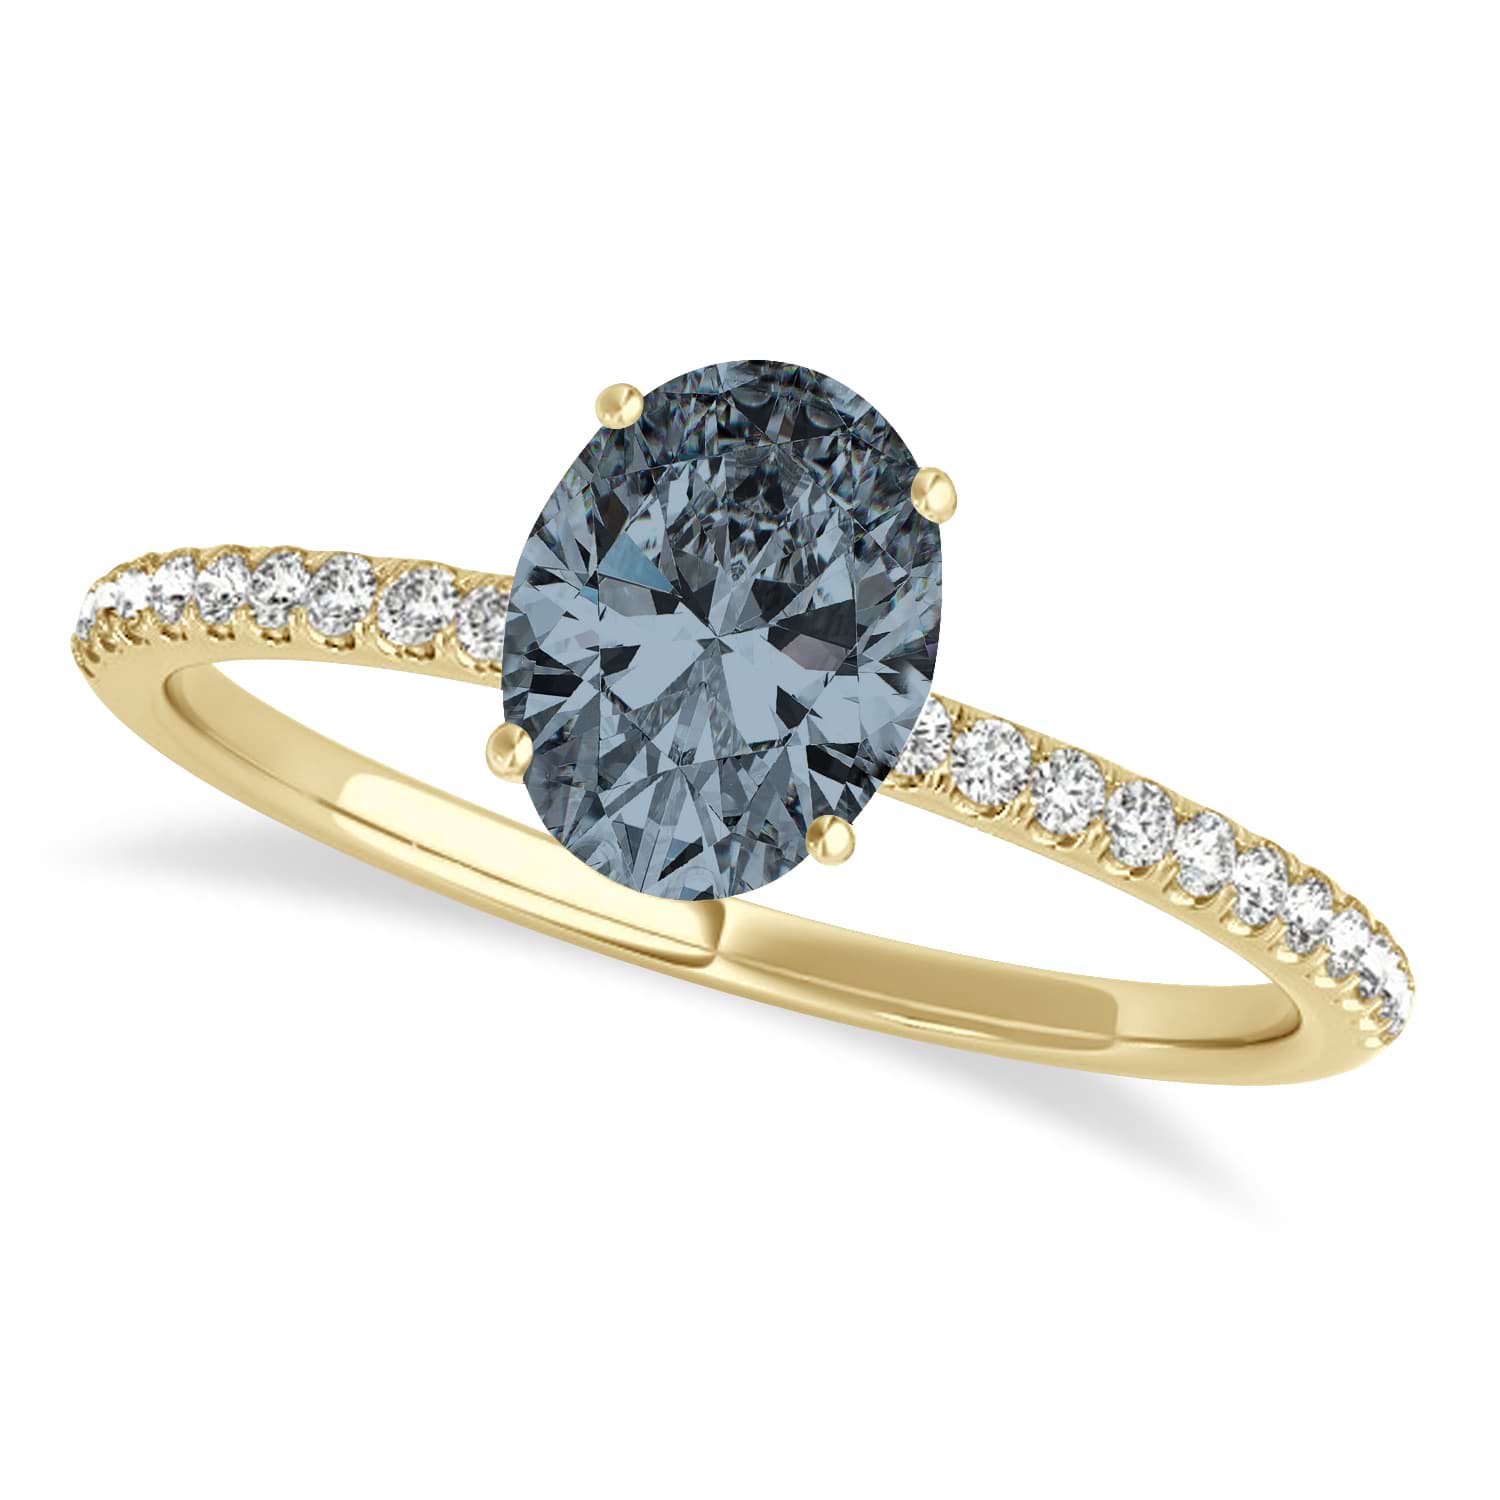 Gray Spinel & Diamond Accented Oval Shape Engagement Ring 18k Yellow Gold (2.00ct)